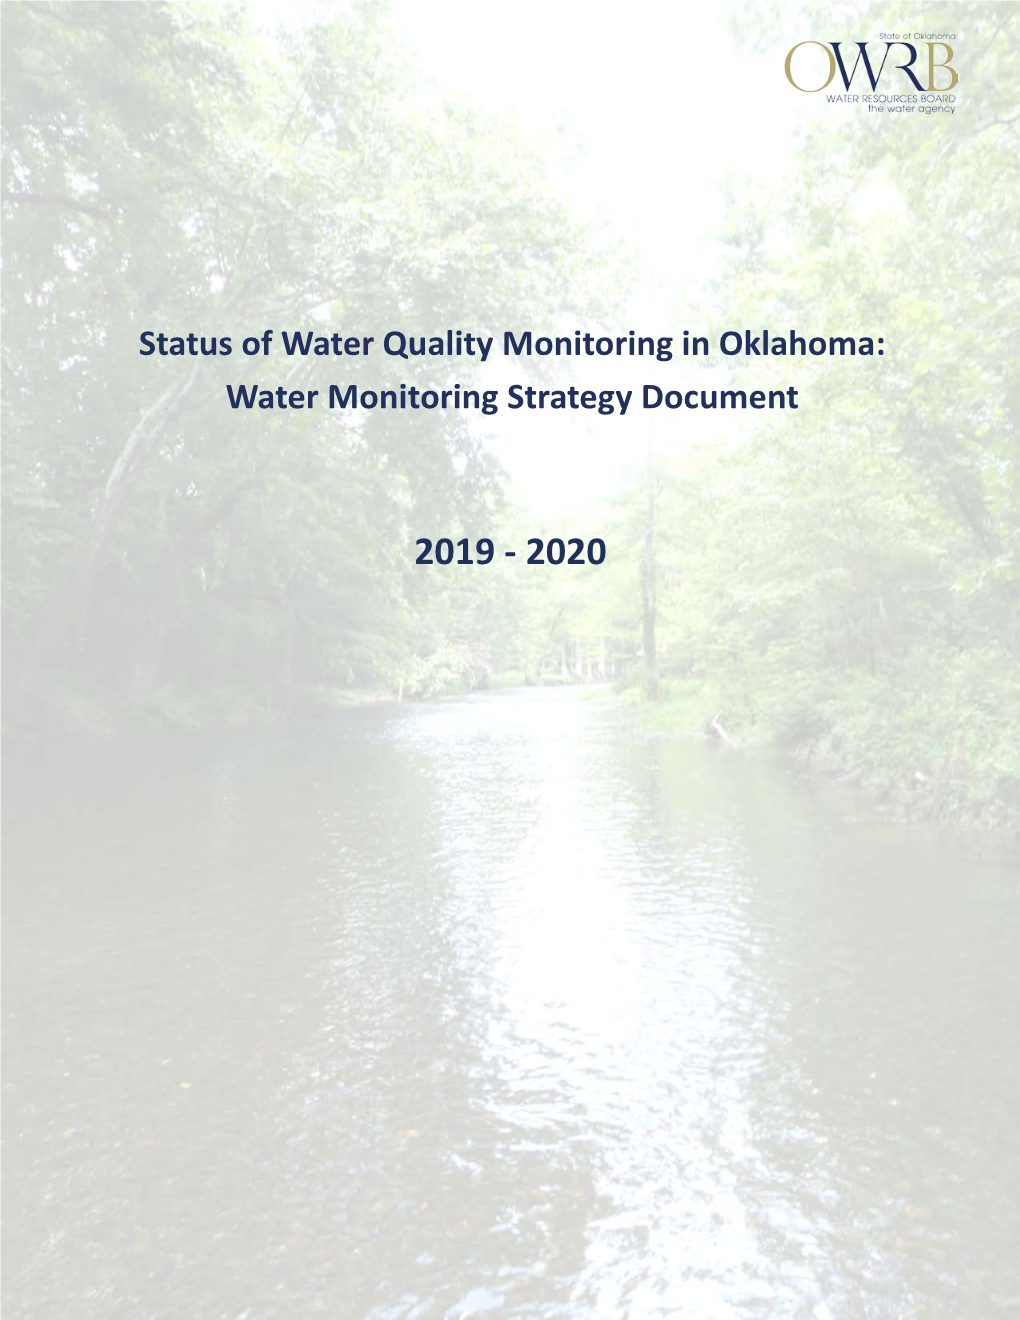 Status of Water Quality Monitoring in Oklahoma: Water Monitoring Strategy Document